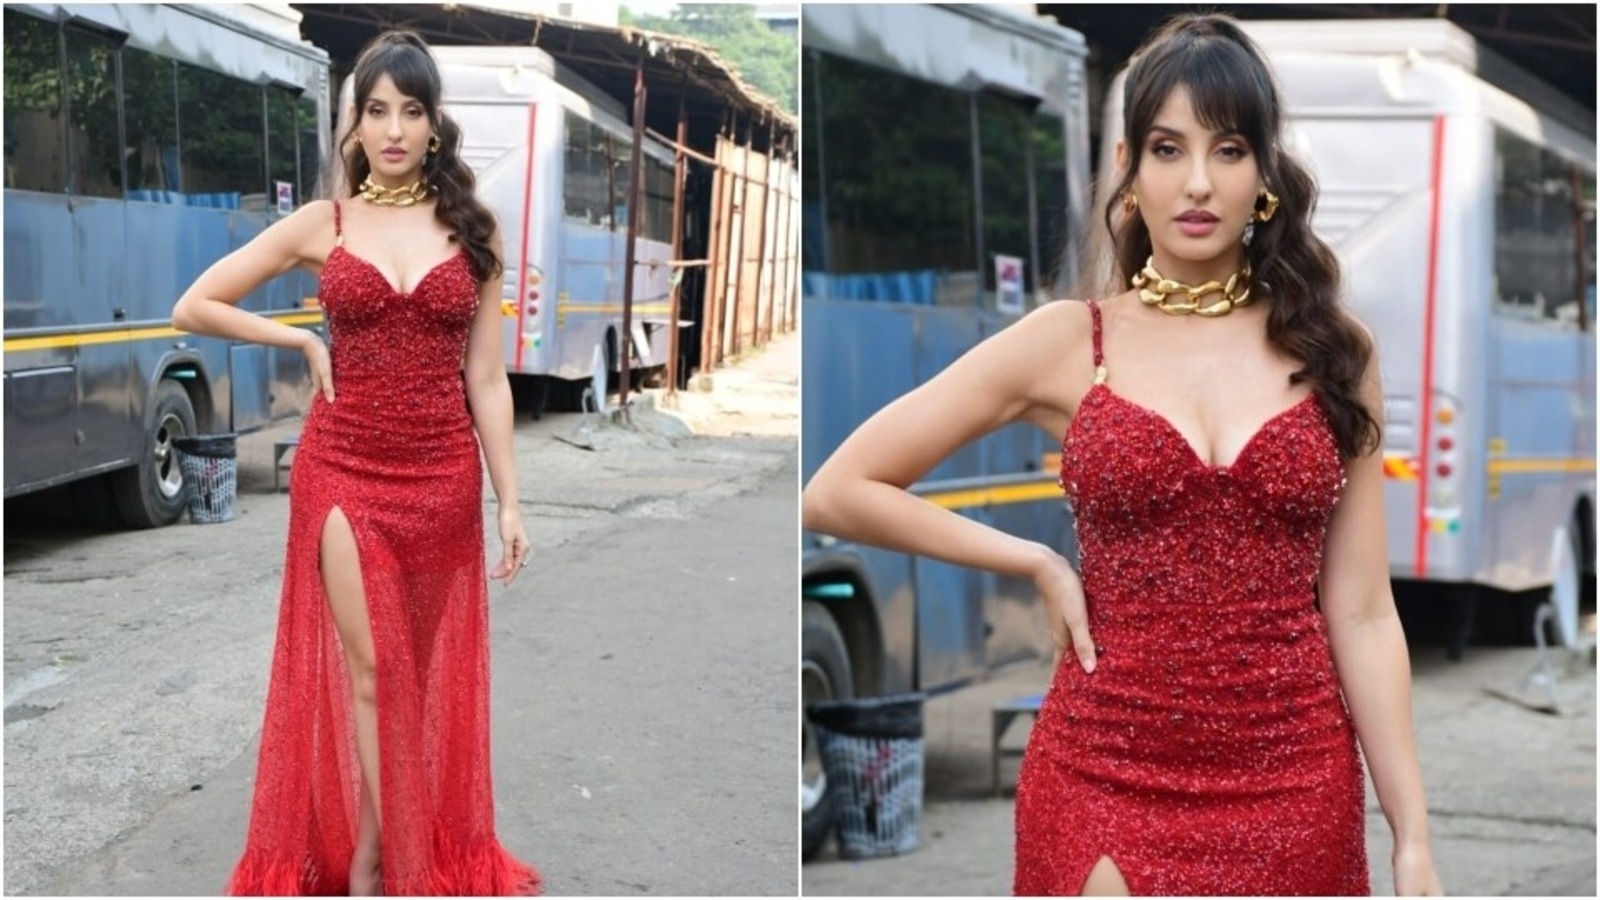 nora-fatehi-lights-up-jhalak-dikhhla-jaa-sets-in-a-red-sequined-gown